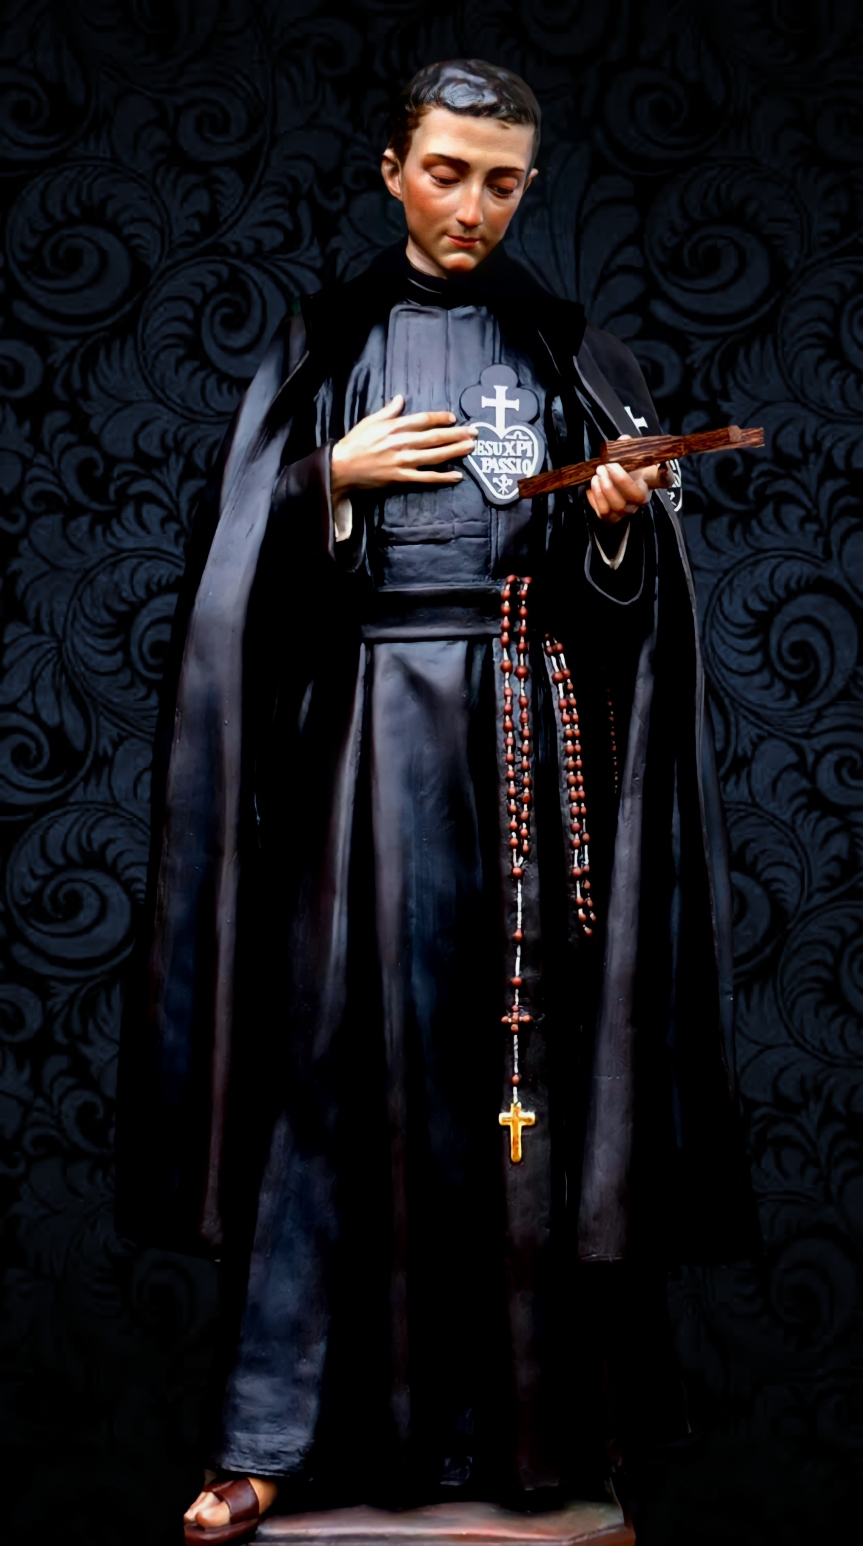 St Gabriel of Our Lady of Sorrows – HD Image / Wallpaper